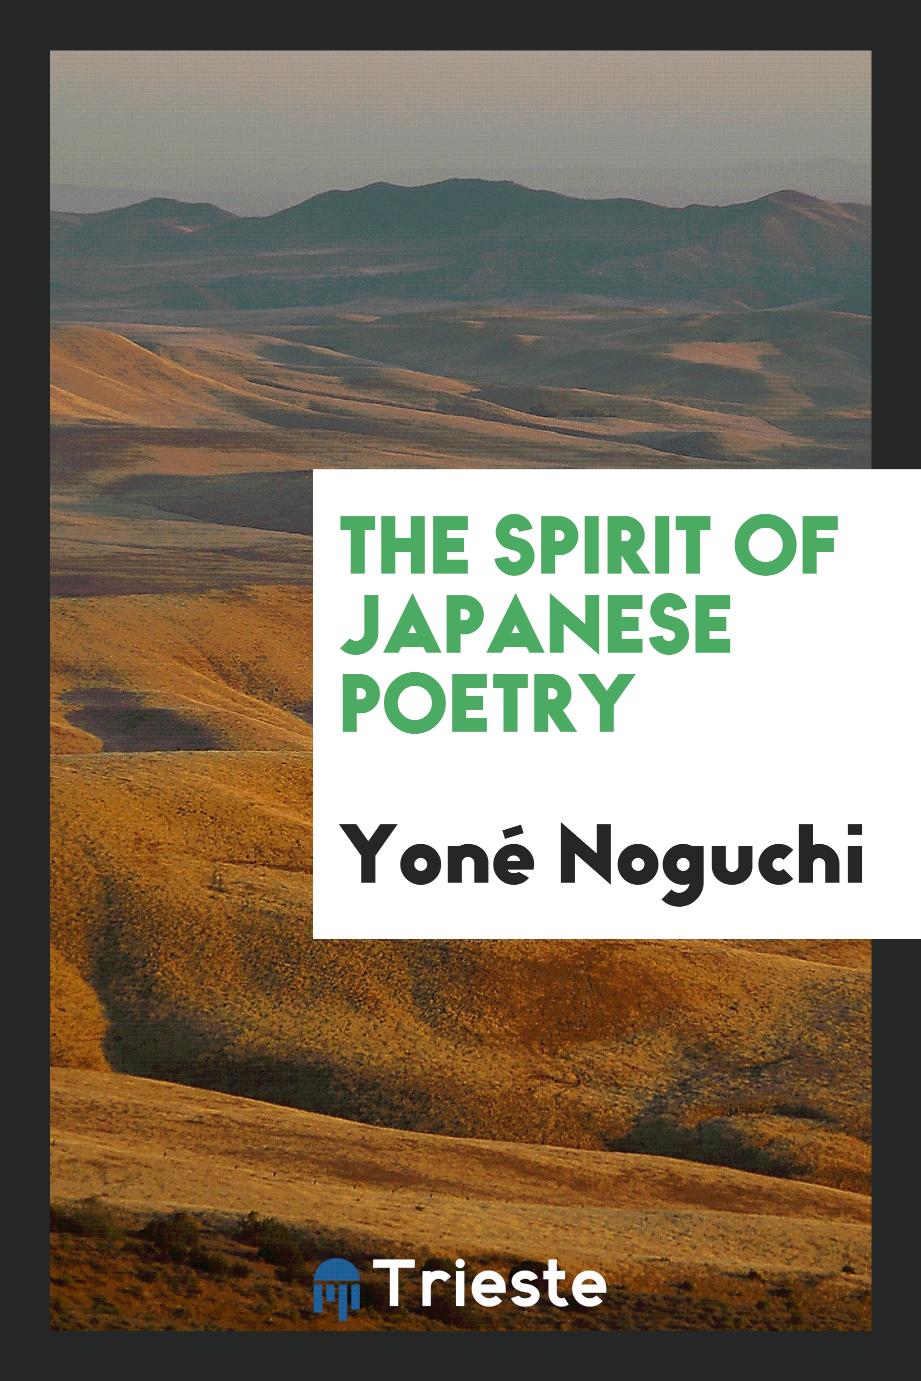 The spirit of Japanese poetry